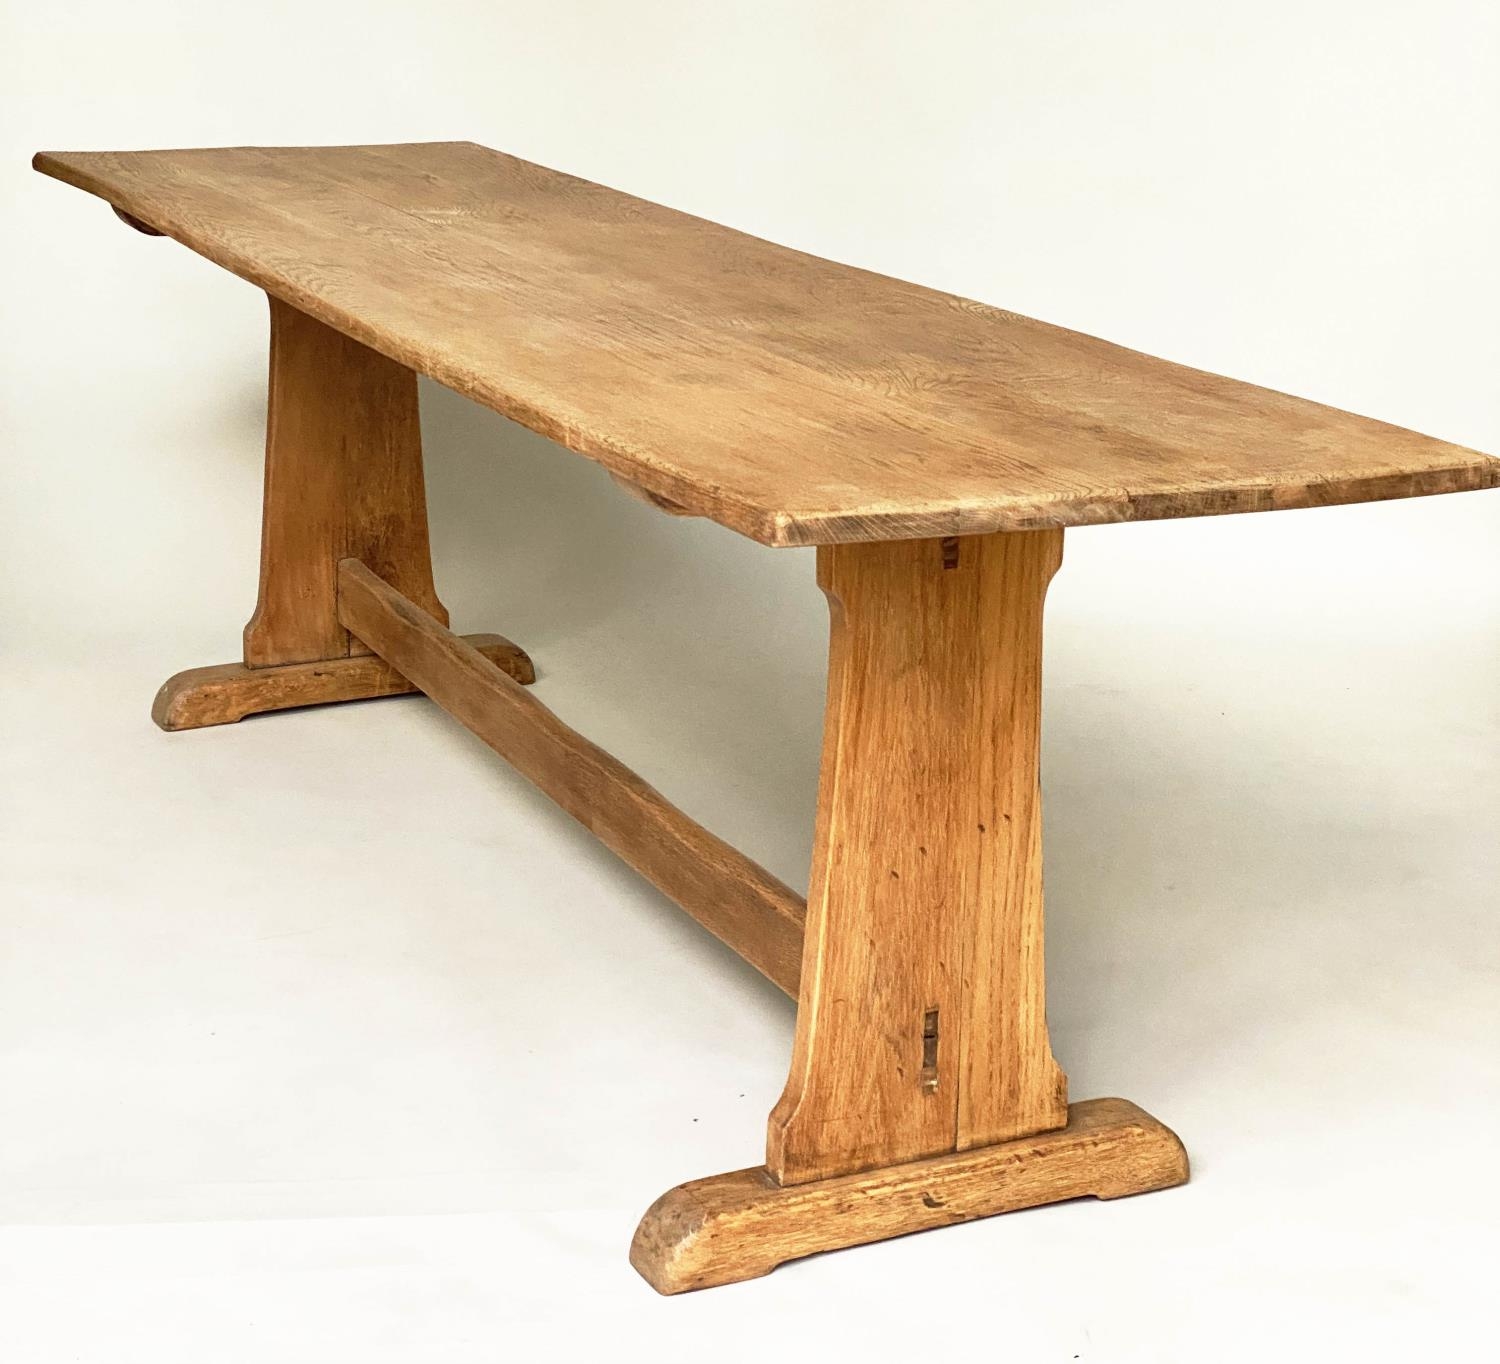 REFECTORY TABLE, vintage English oak with planked narrow rectangular top and twin trestle